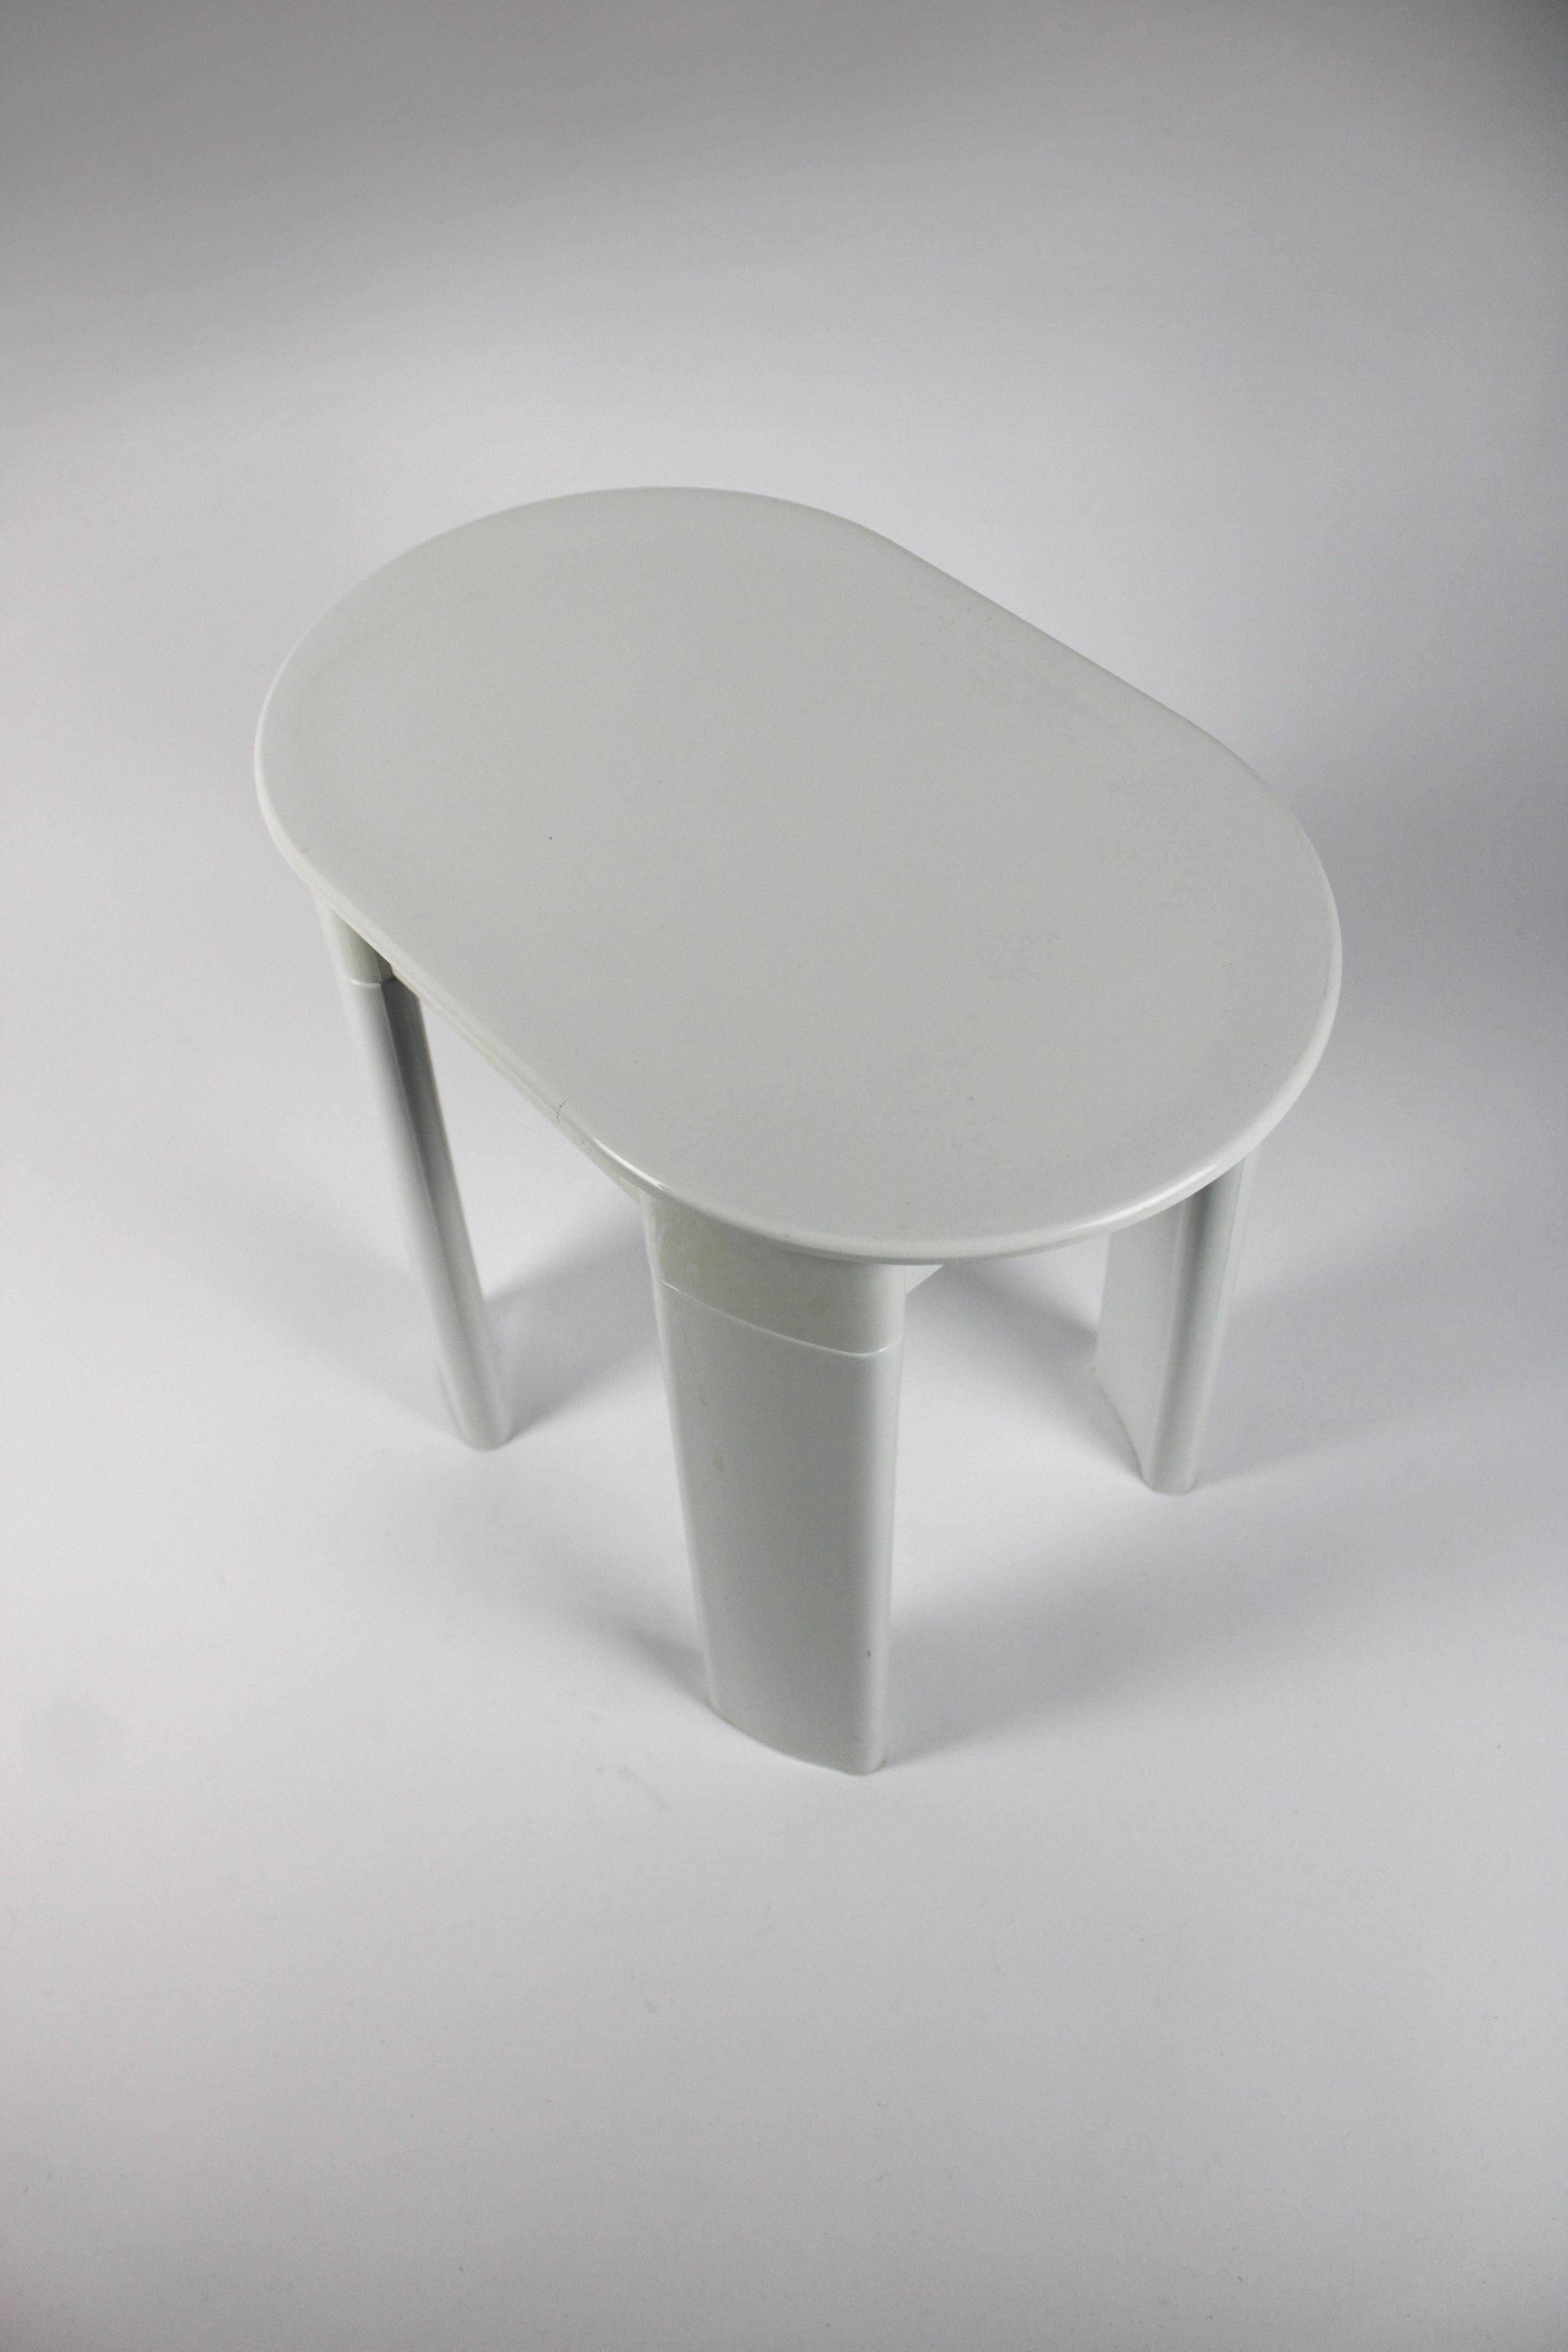 Olaf Von Bohr Side Table Space Age Stool Gedy Plastic Italy 1970's For Sale 1